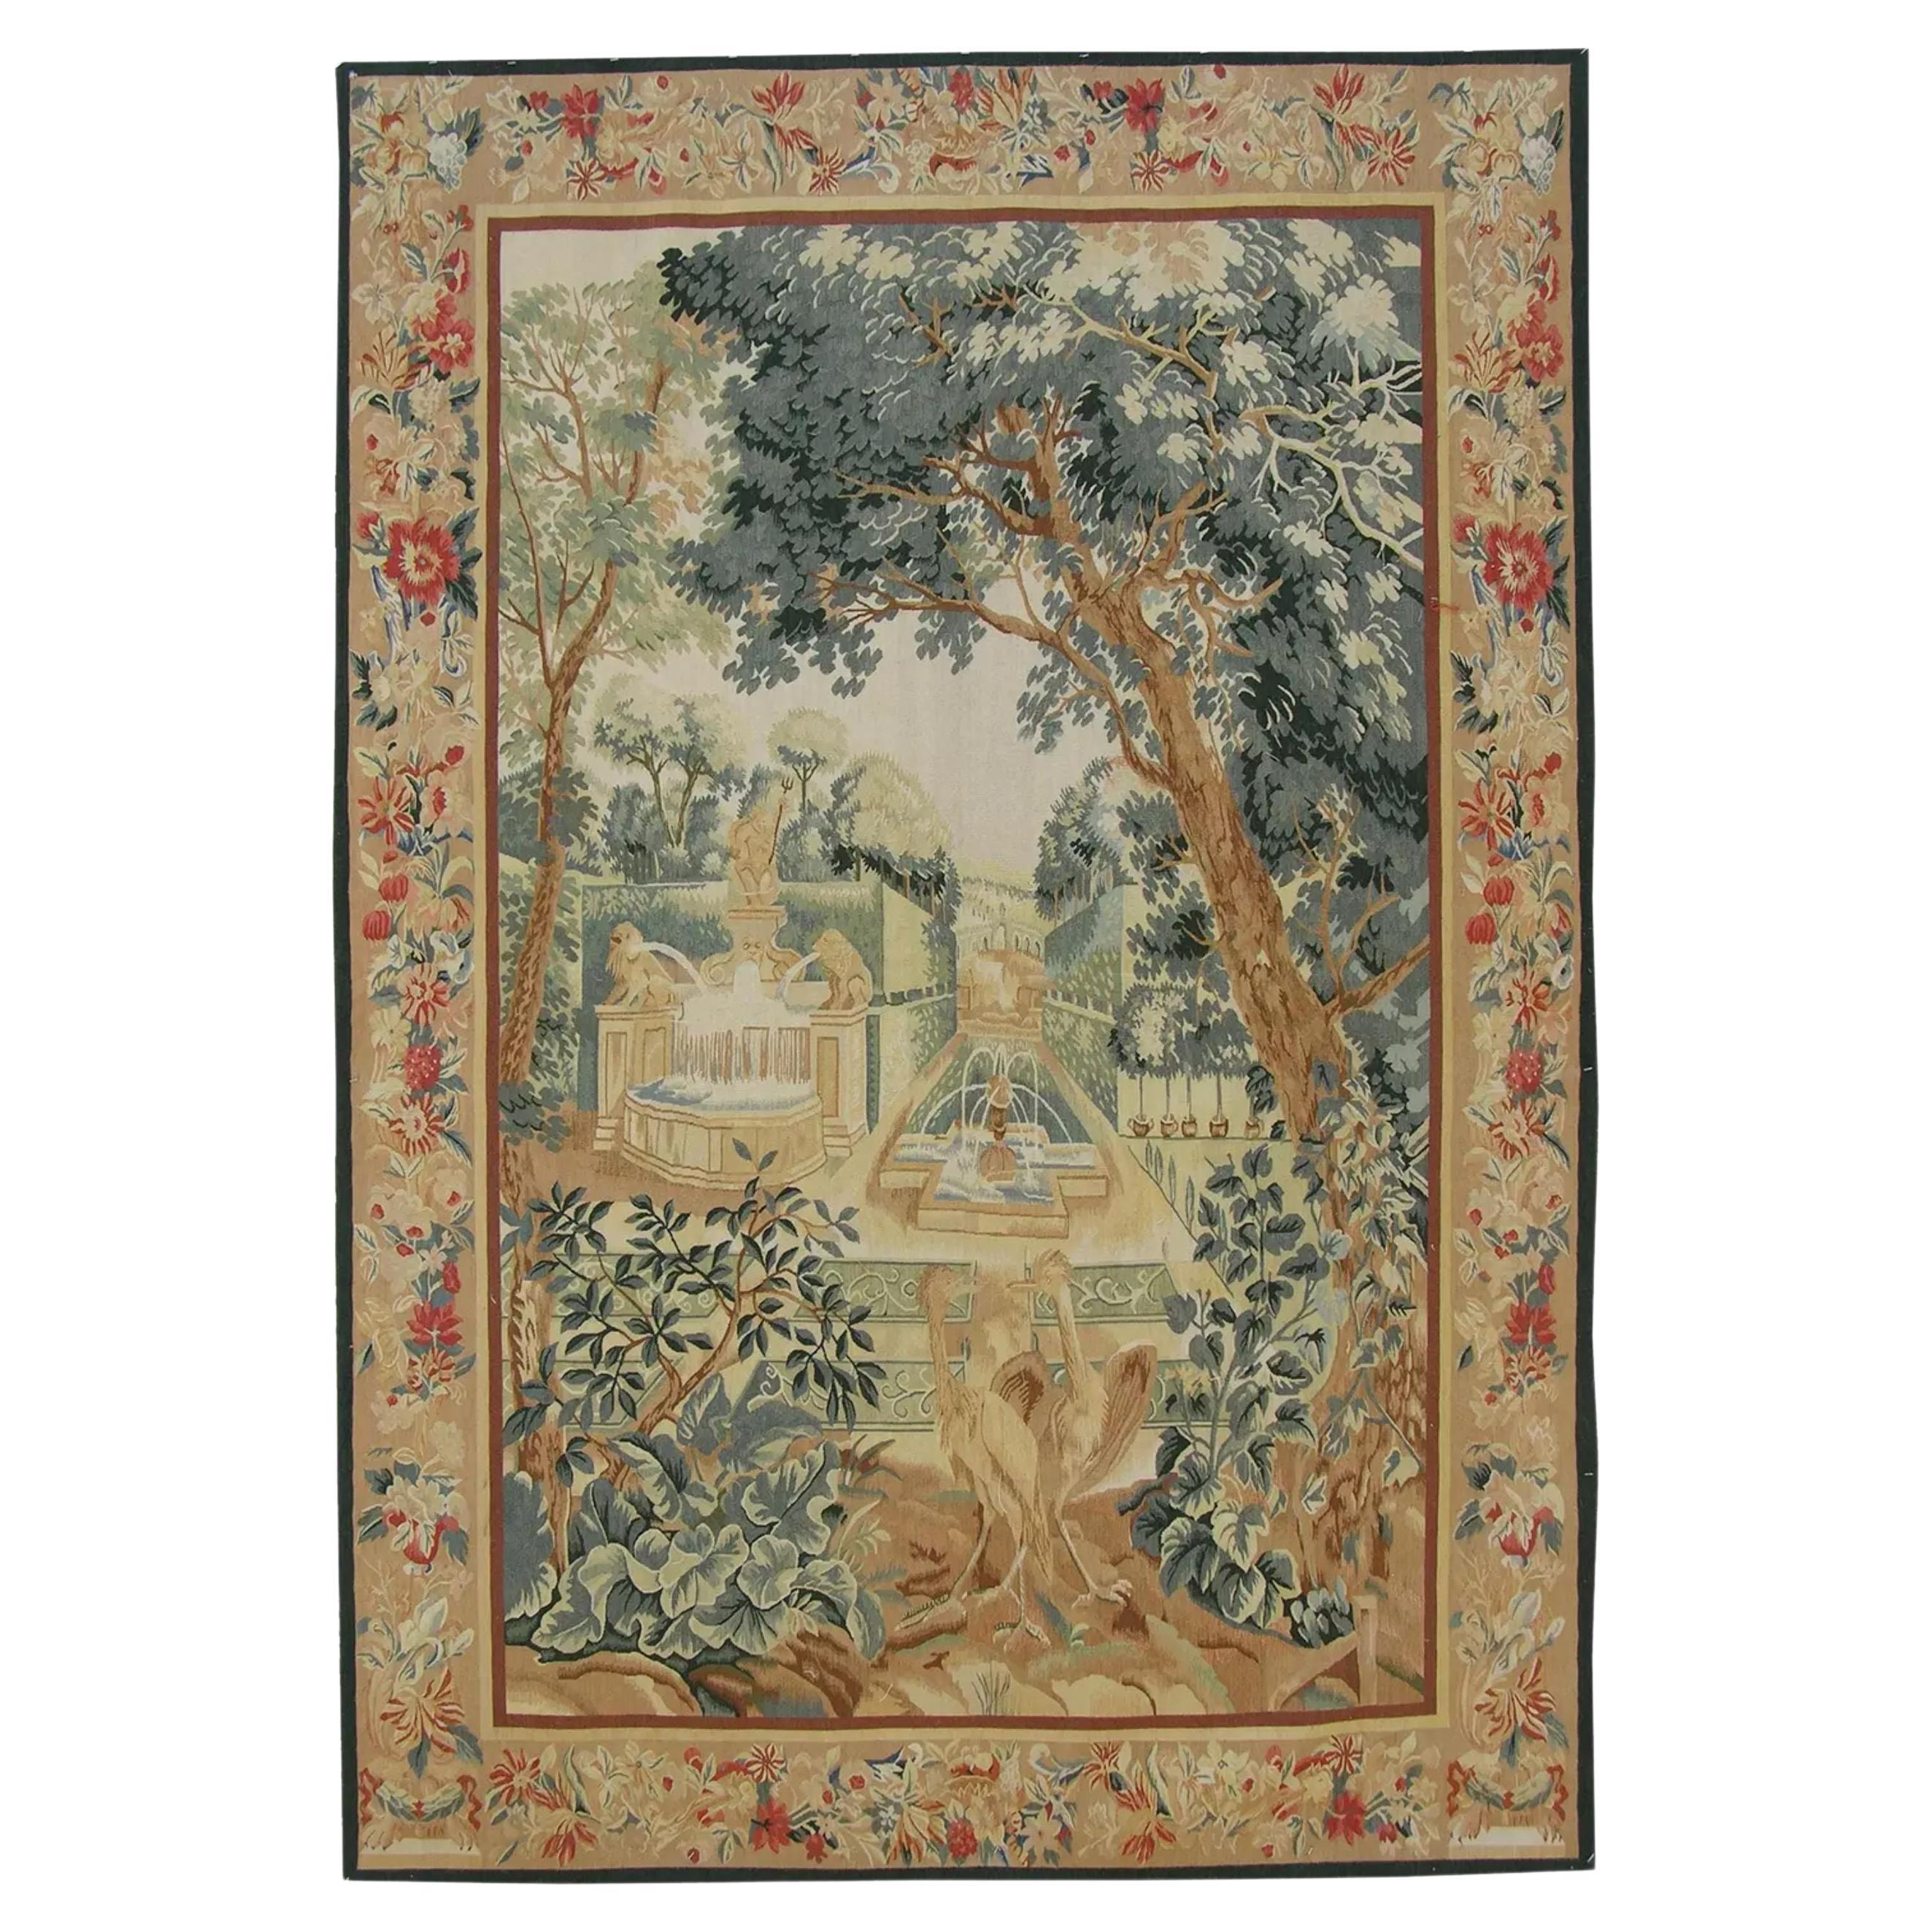 Vintage Woven Fountain Tapestry 7.2X5.5